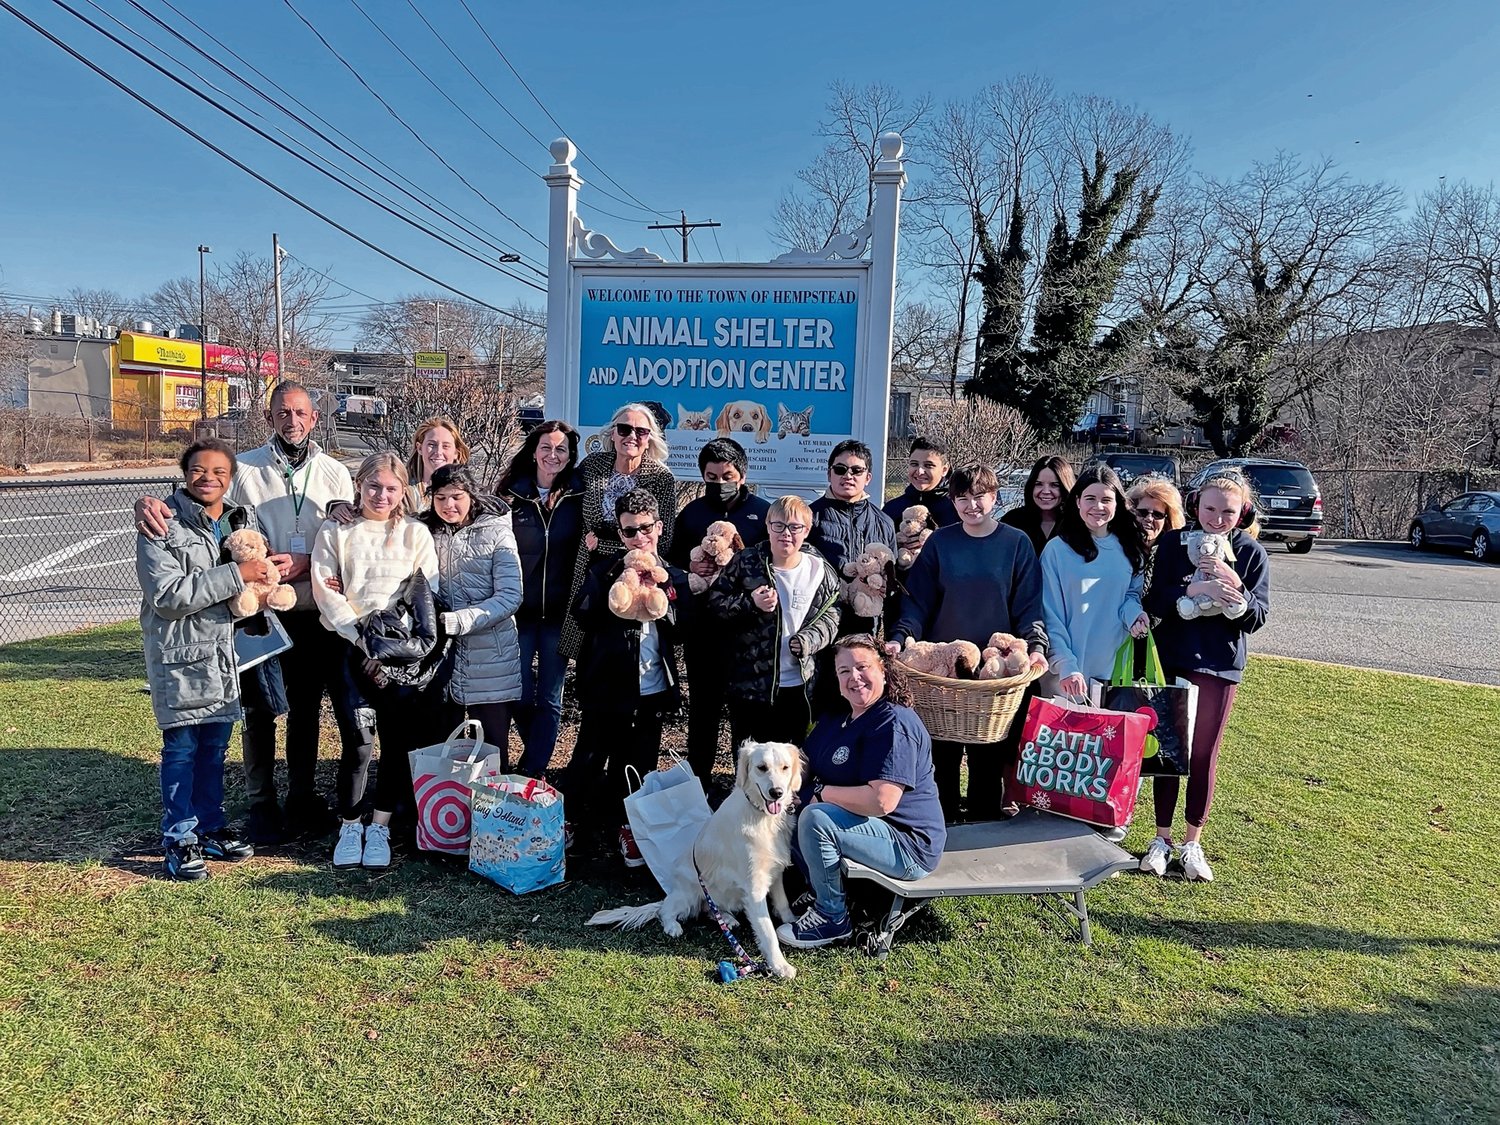 Students in the Career Development Program at Lynbrook High School and North Middle School visited the Town of Hempstead Animal Shelter to deliver donations.